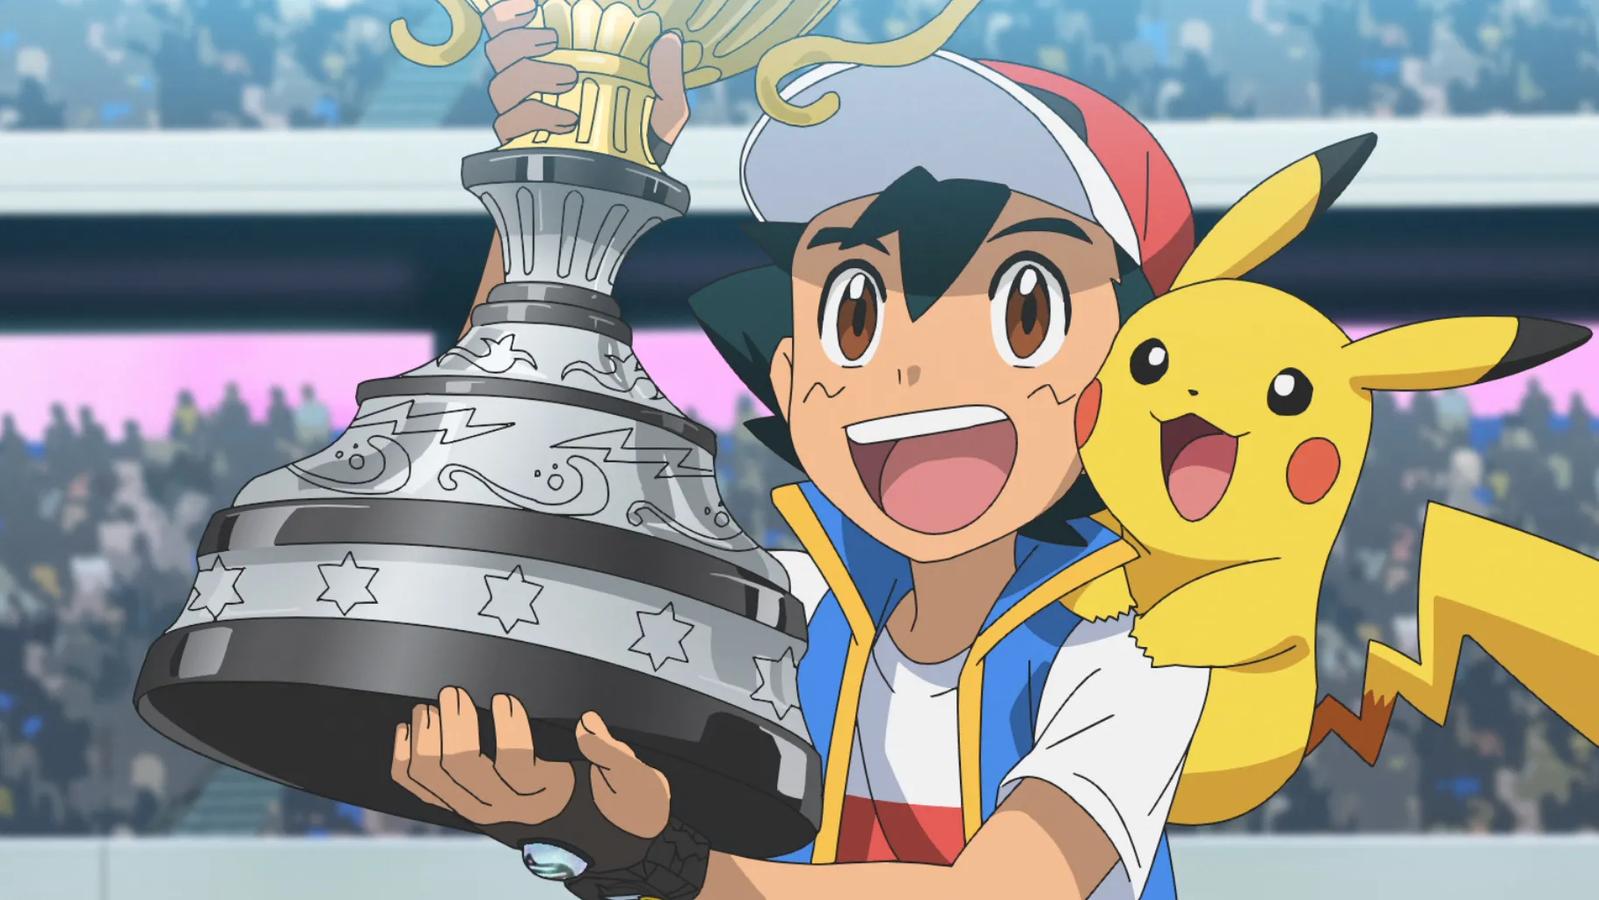 Will Ash Age After Becoming a Champion Ash and Pikachu